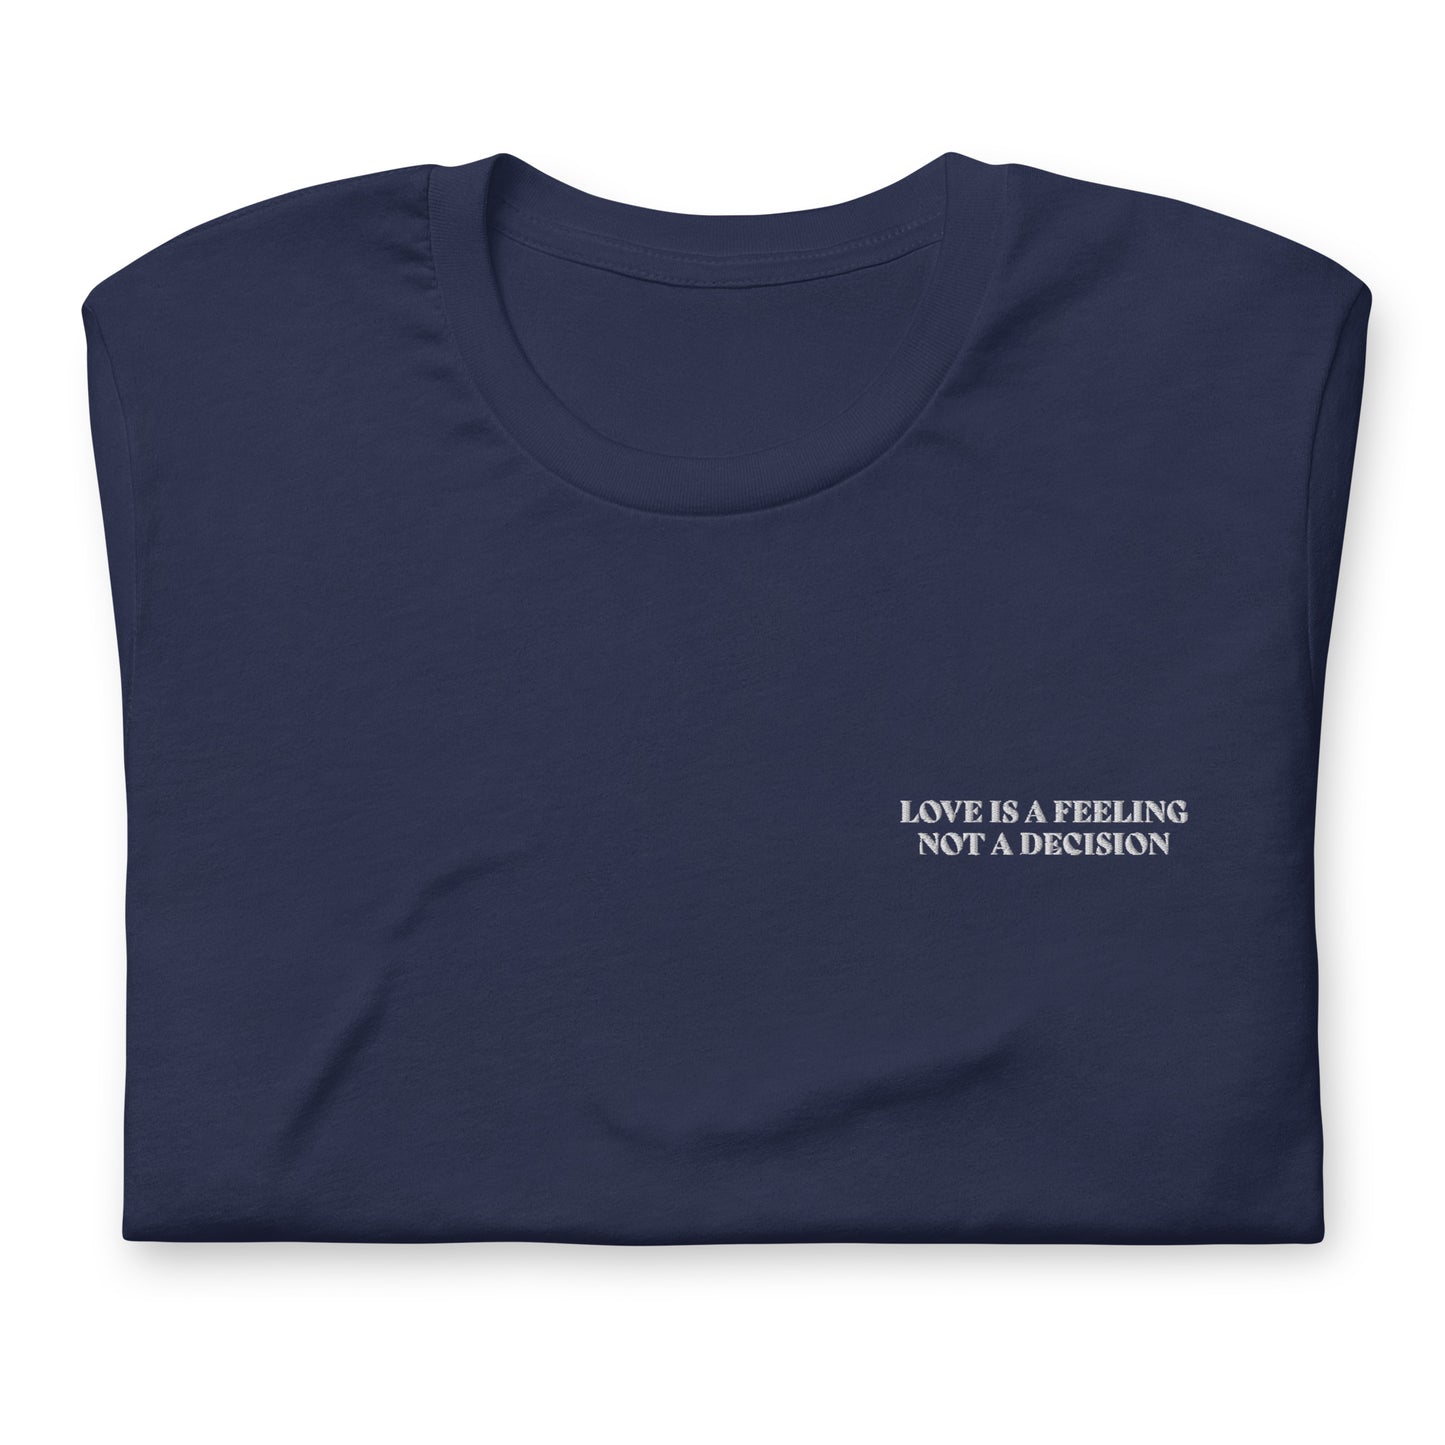 LOVE IS A FEELING NOT A DECISION - embroidered T-shirt